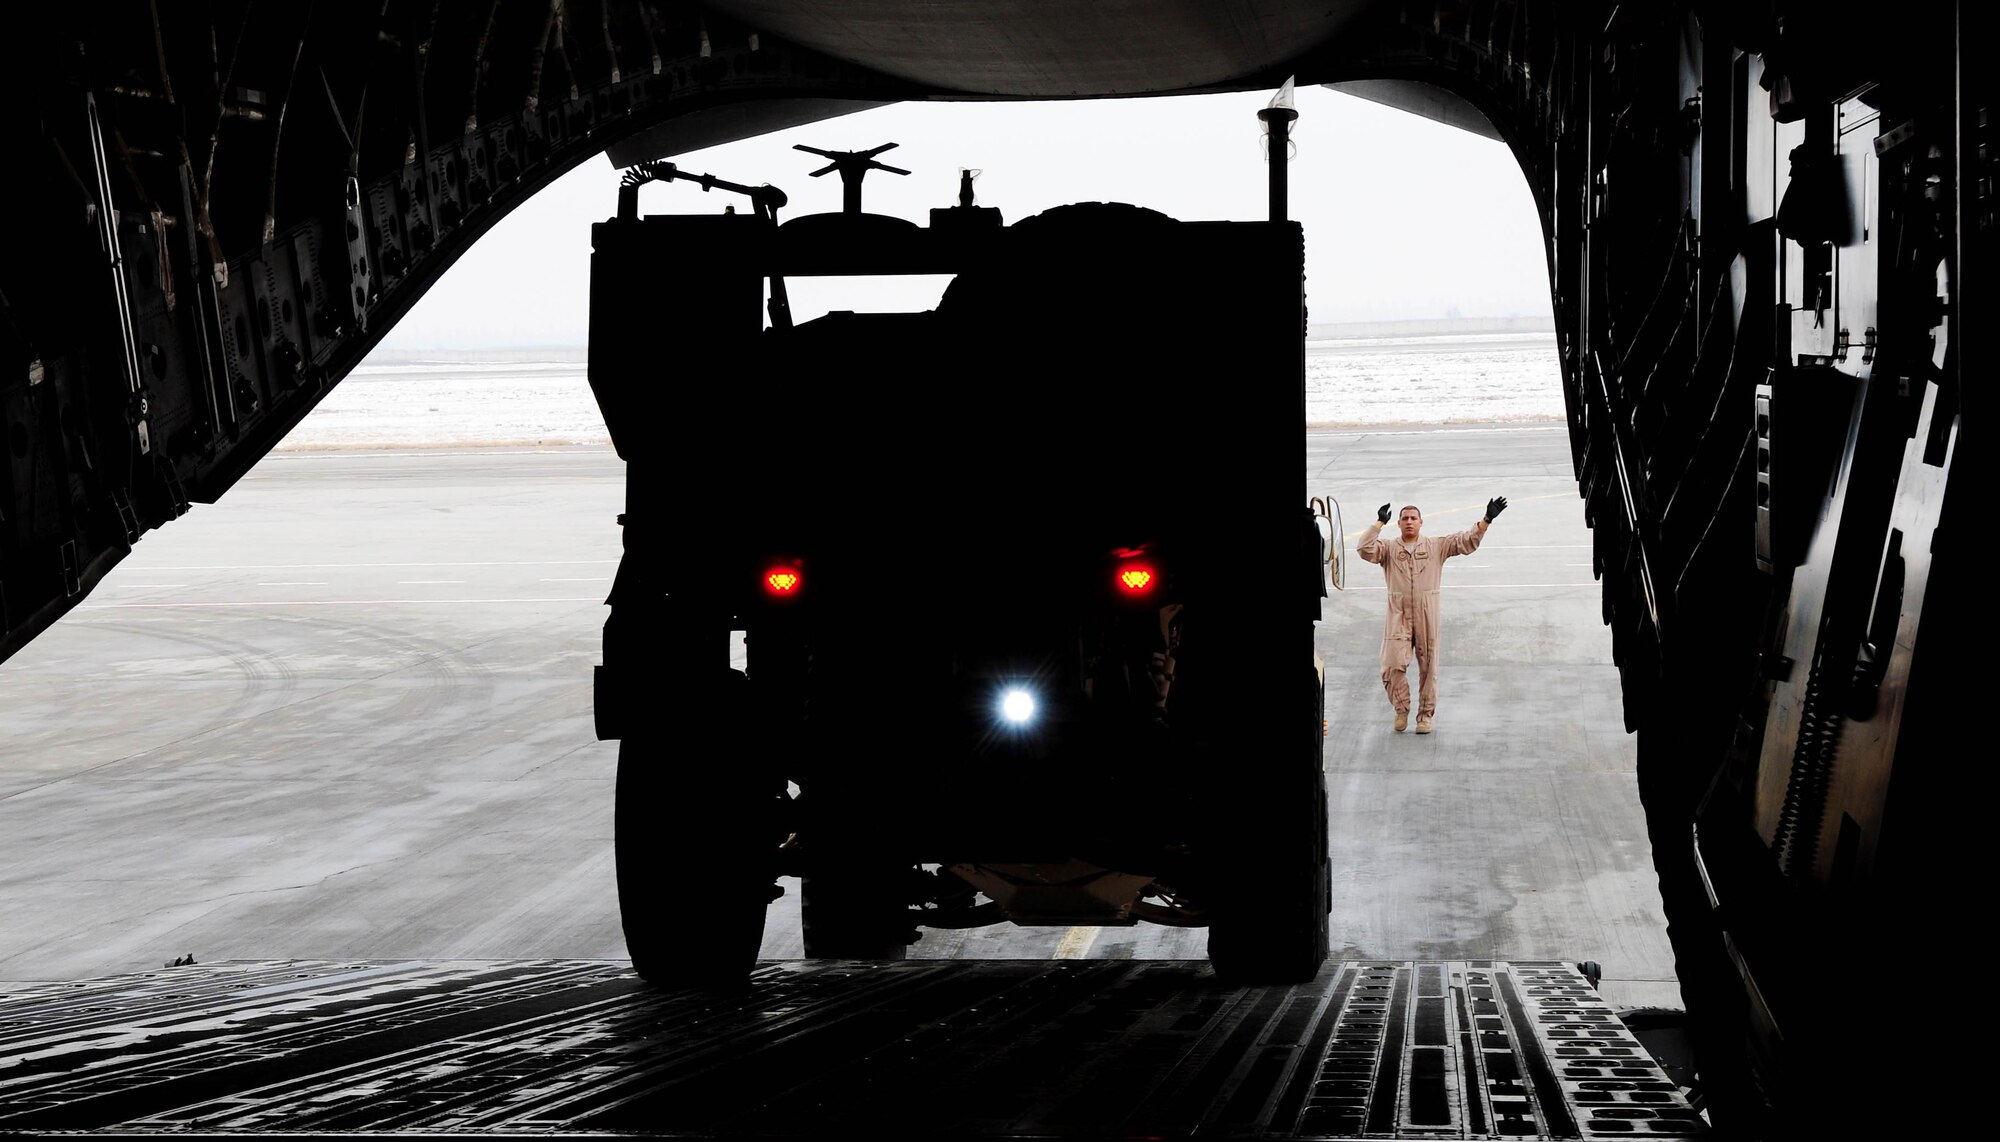 TRANSIT CENTER AT MANAS, Kyrgyzstan - Tech. Sgt. Antonio Mu?oz, NCOIC and instructor loadmaster from the Transit Center?s C-17 detachment, guides an MRAP-all terrain vehicle into a C-17 Globemaster III prior to shipment to Afghanistan. The new M-ATVs are better equipped to withstand current combat conditions. Several C-17s provide airlift for military servicemembers and cargo. (U.S. Air Force photo by Senior Airman Nichelle Anderson)